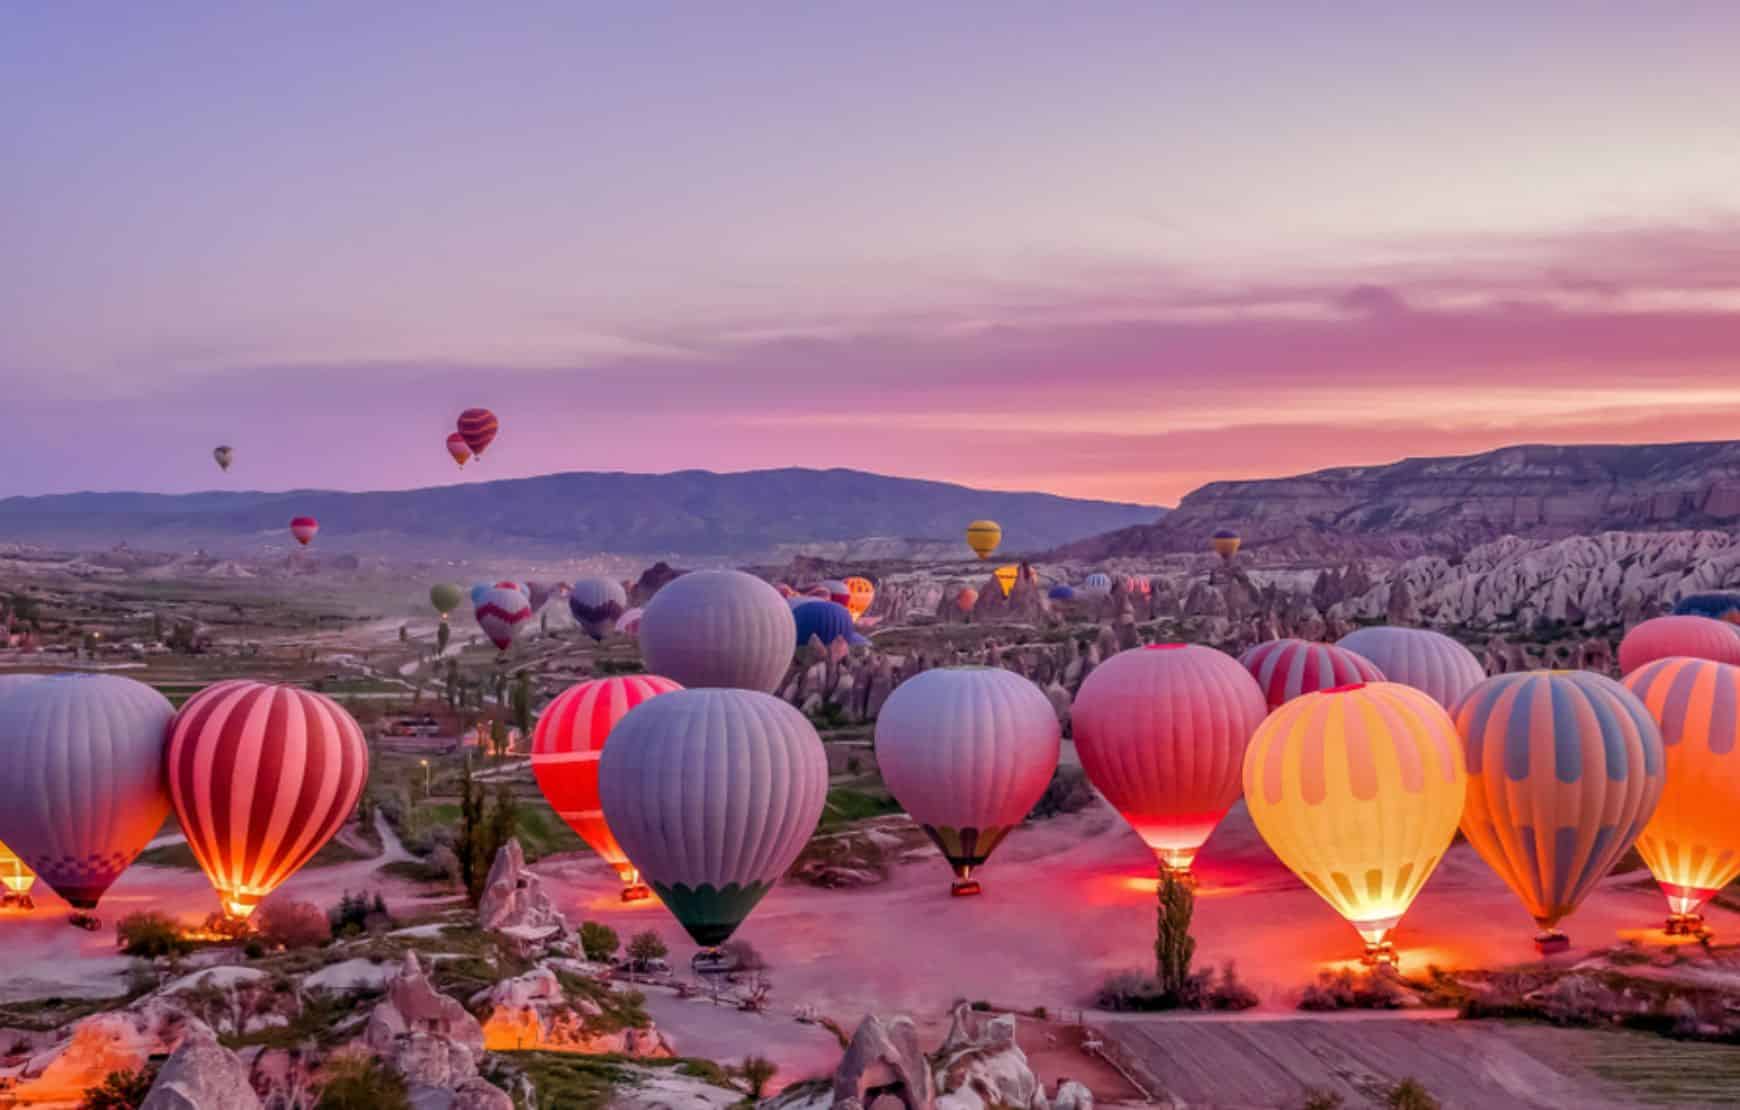 Cappadocia Hot Air Balloon Ride launch site from above take a chance to ride at our Istanbul and Cappadocia Tour